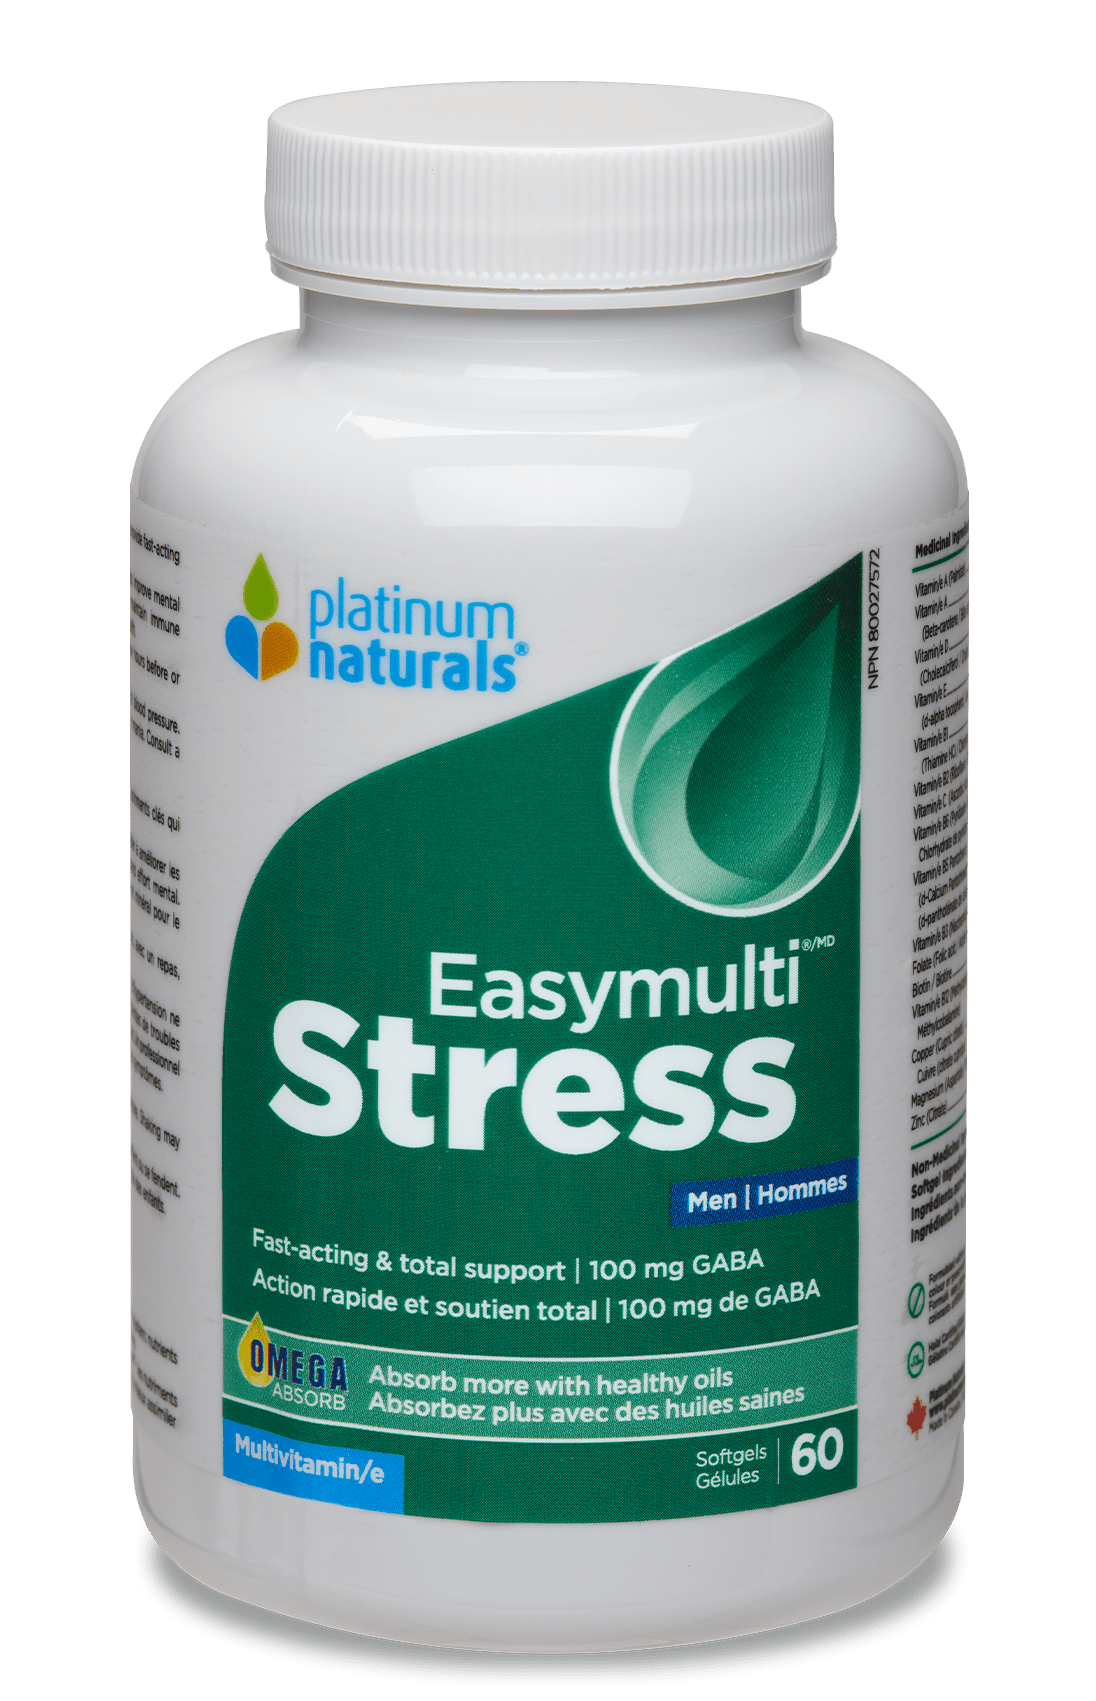 Vitamins for Stress: 7 Great Options Recommended by Experts